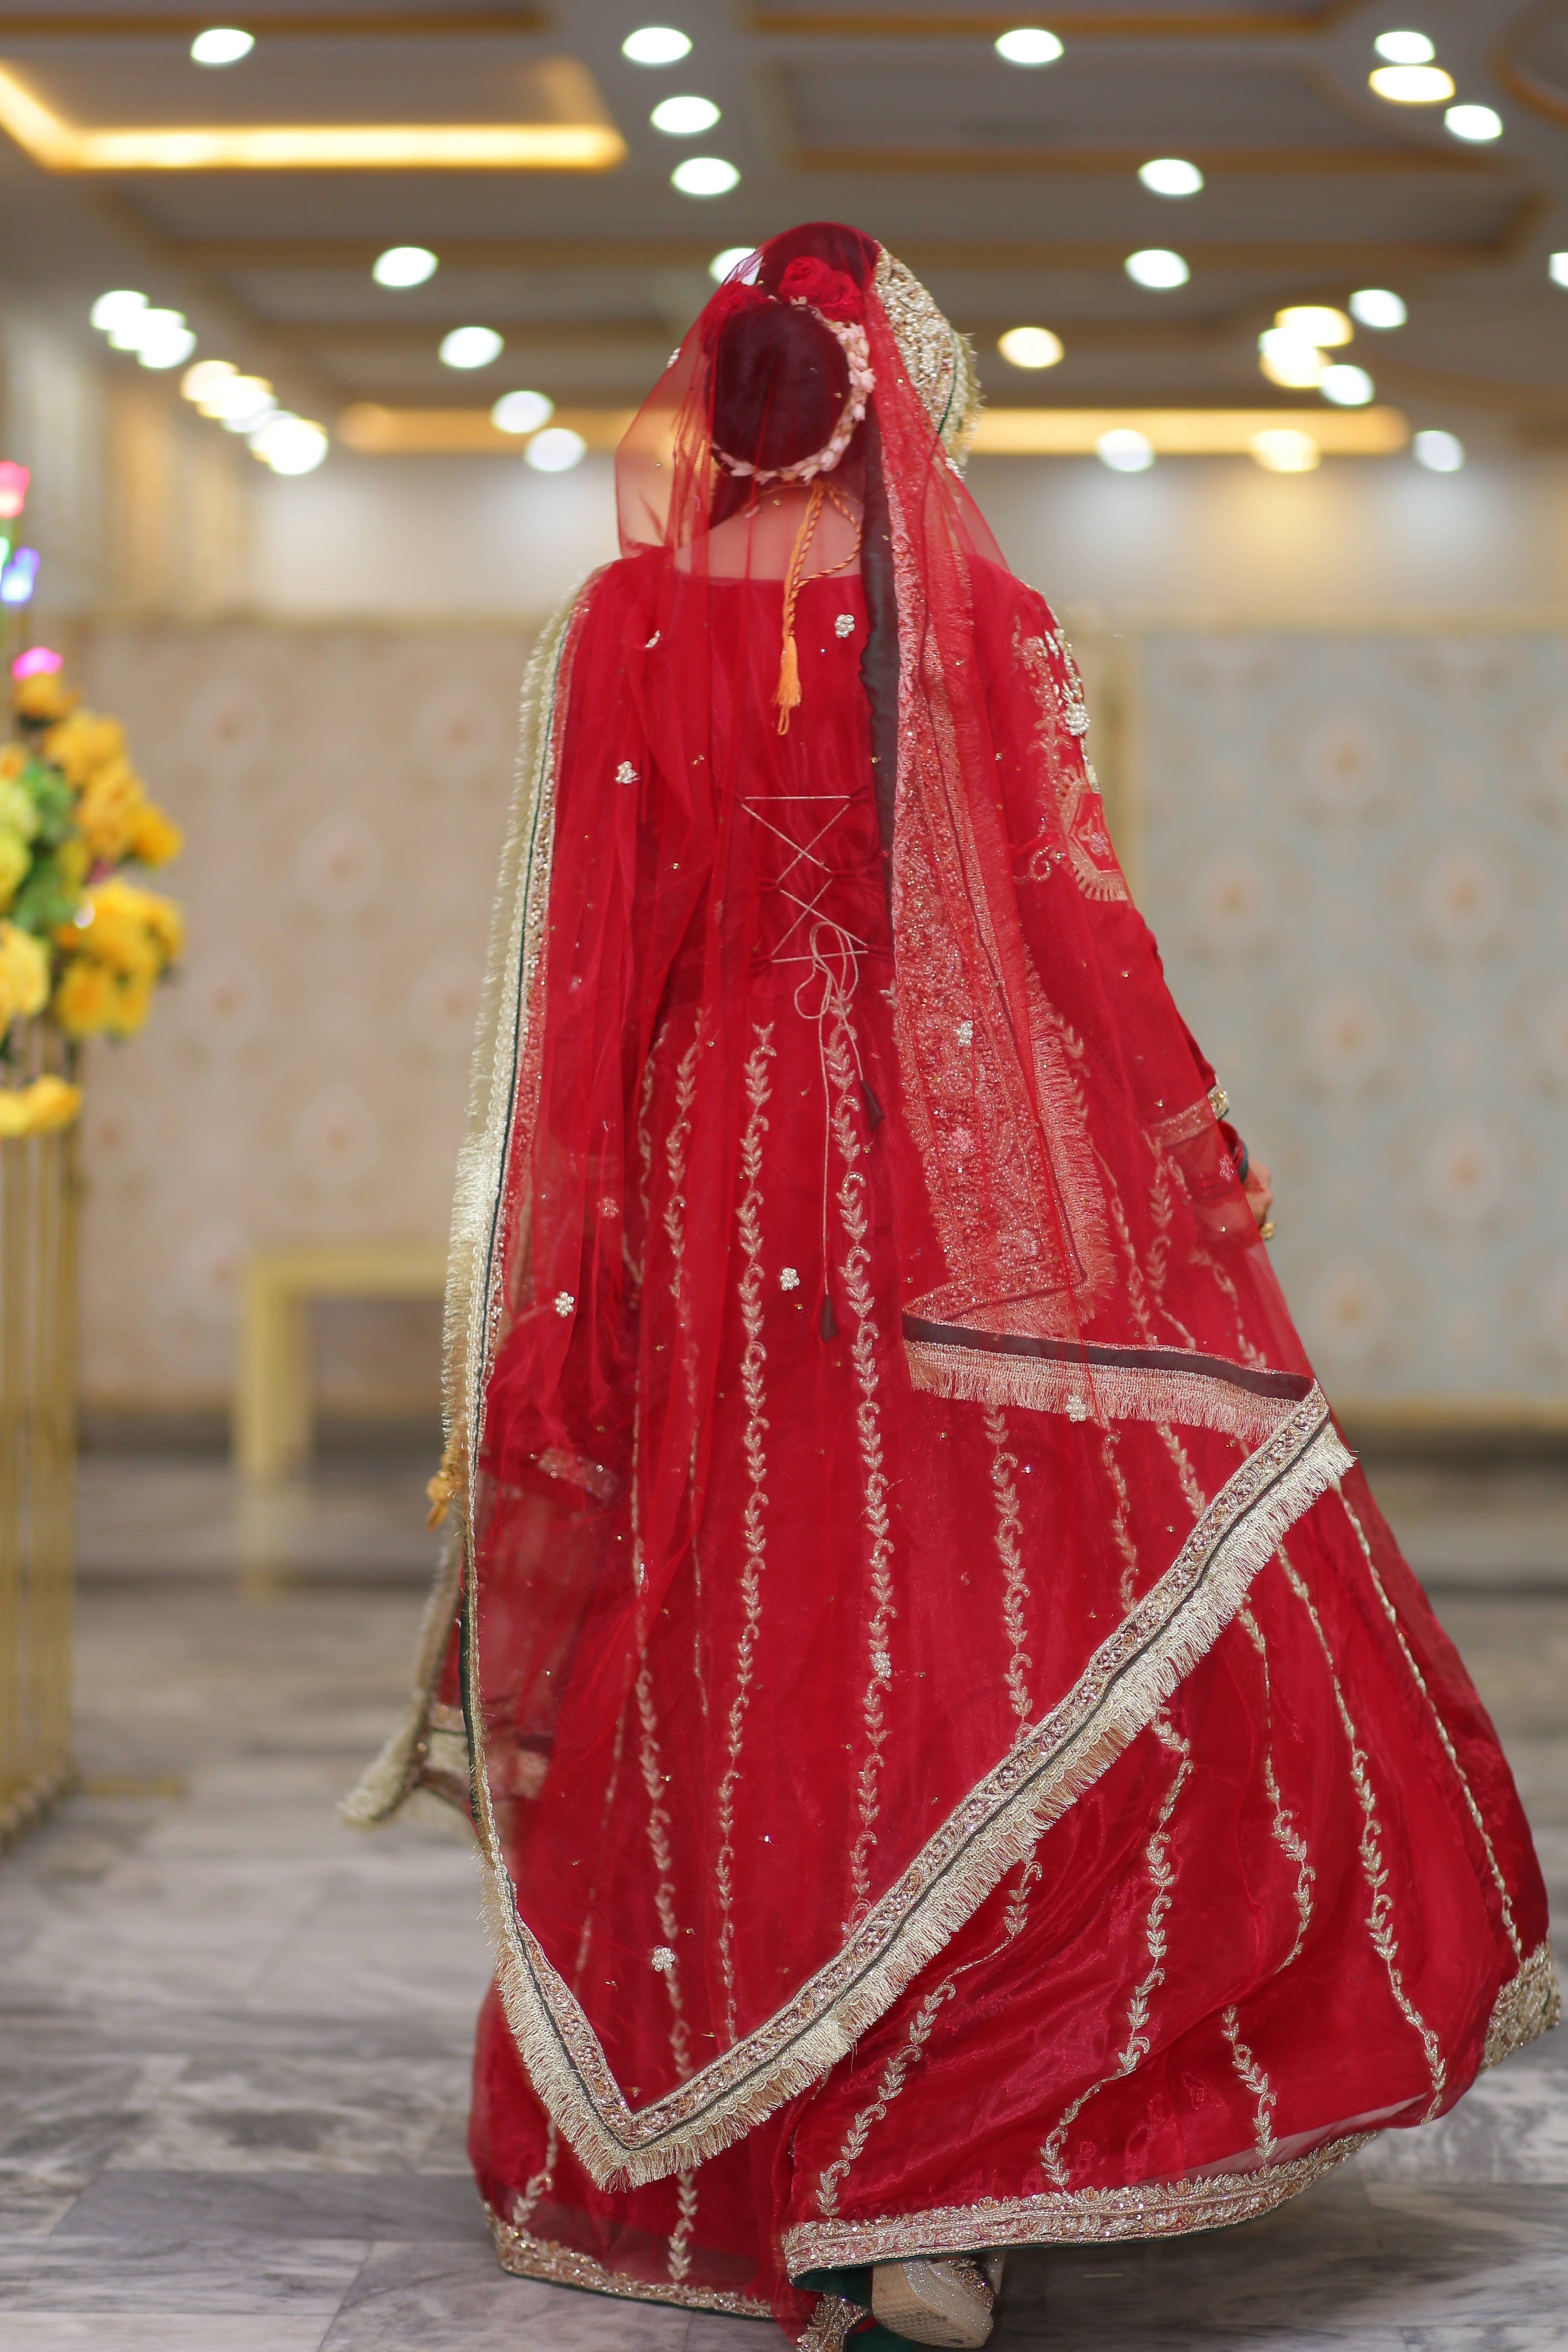 Beautiful Red Bridal Dress | Bridals | Worn Once